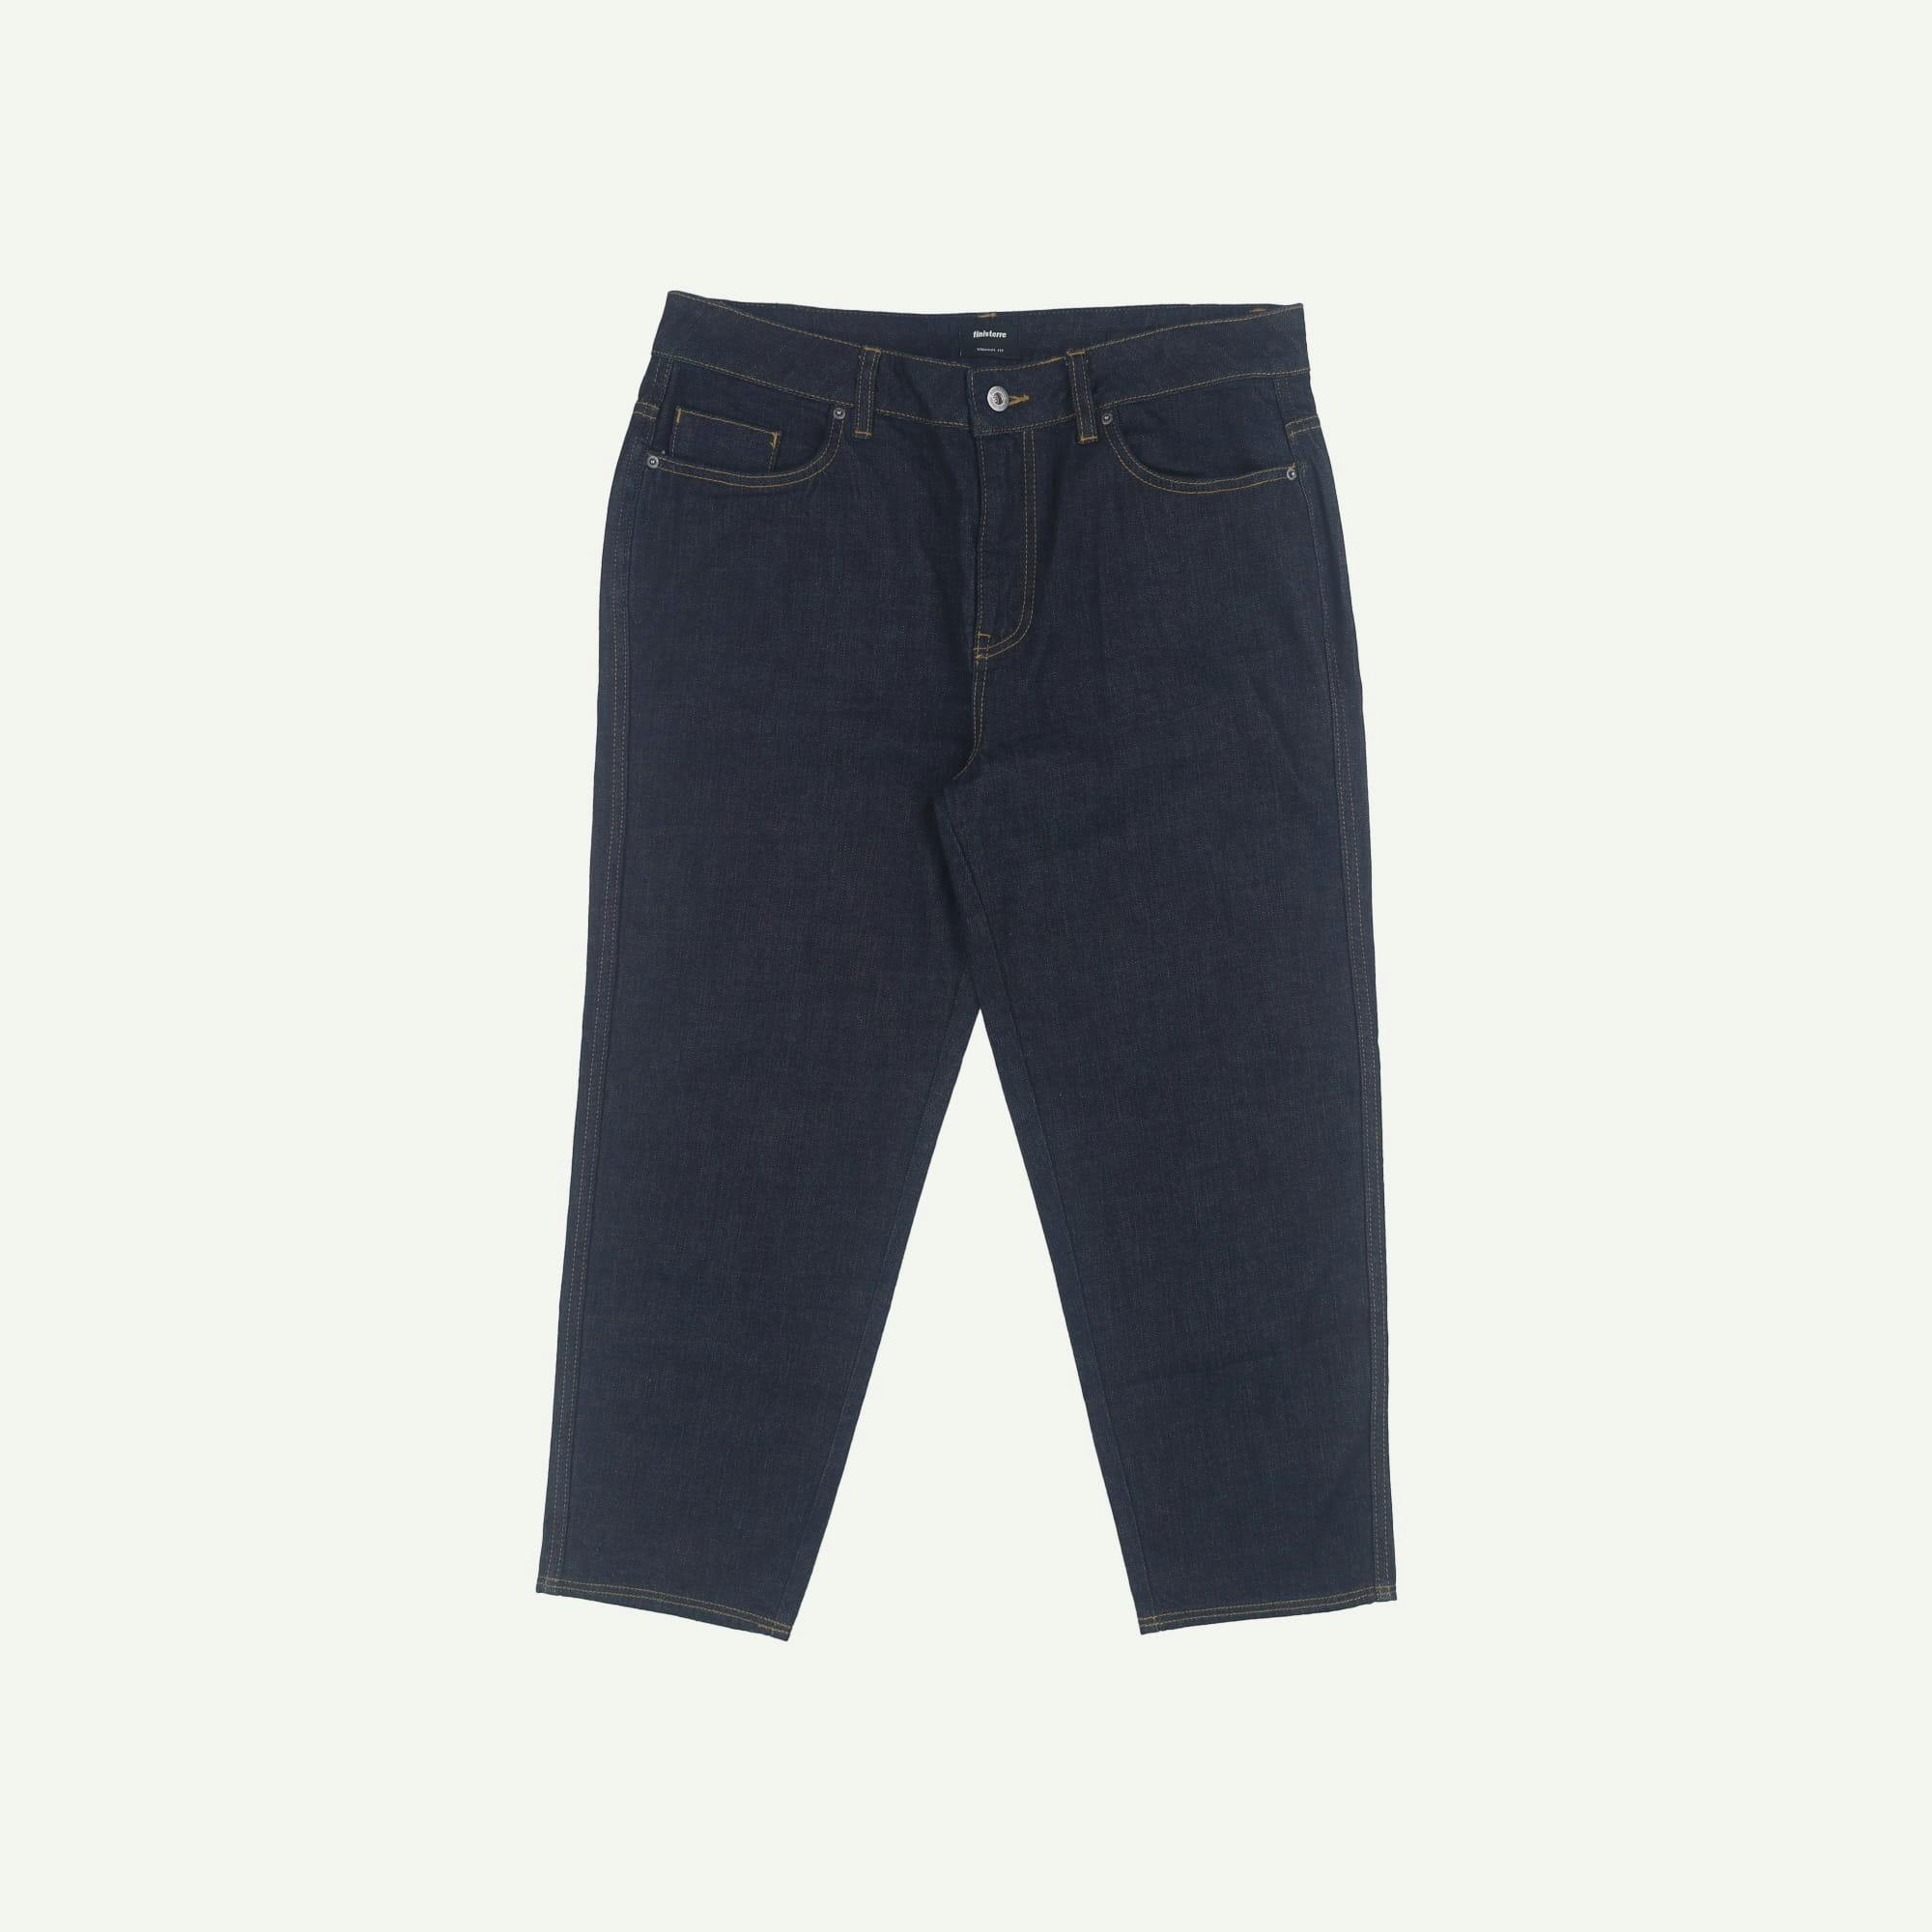 Finisterre As new Navy Tunu Ankle Jeans